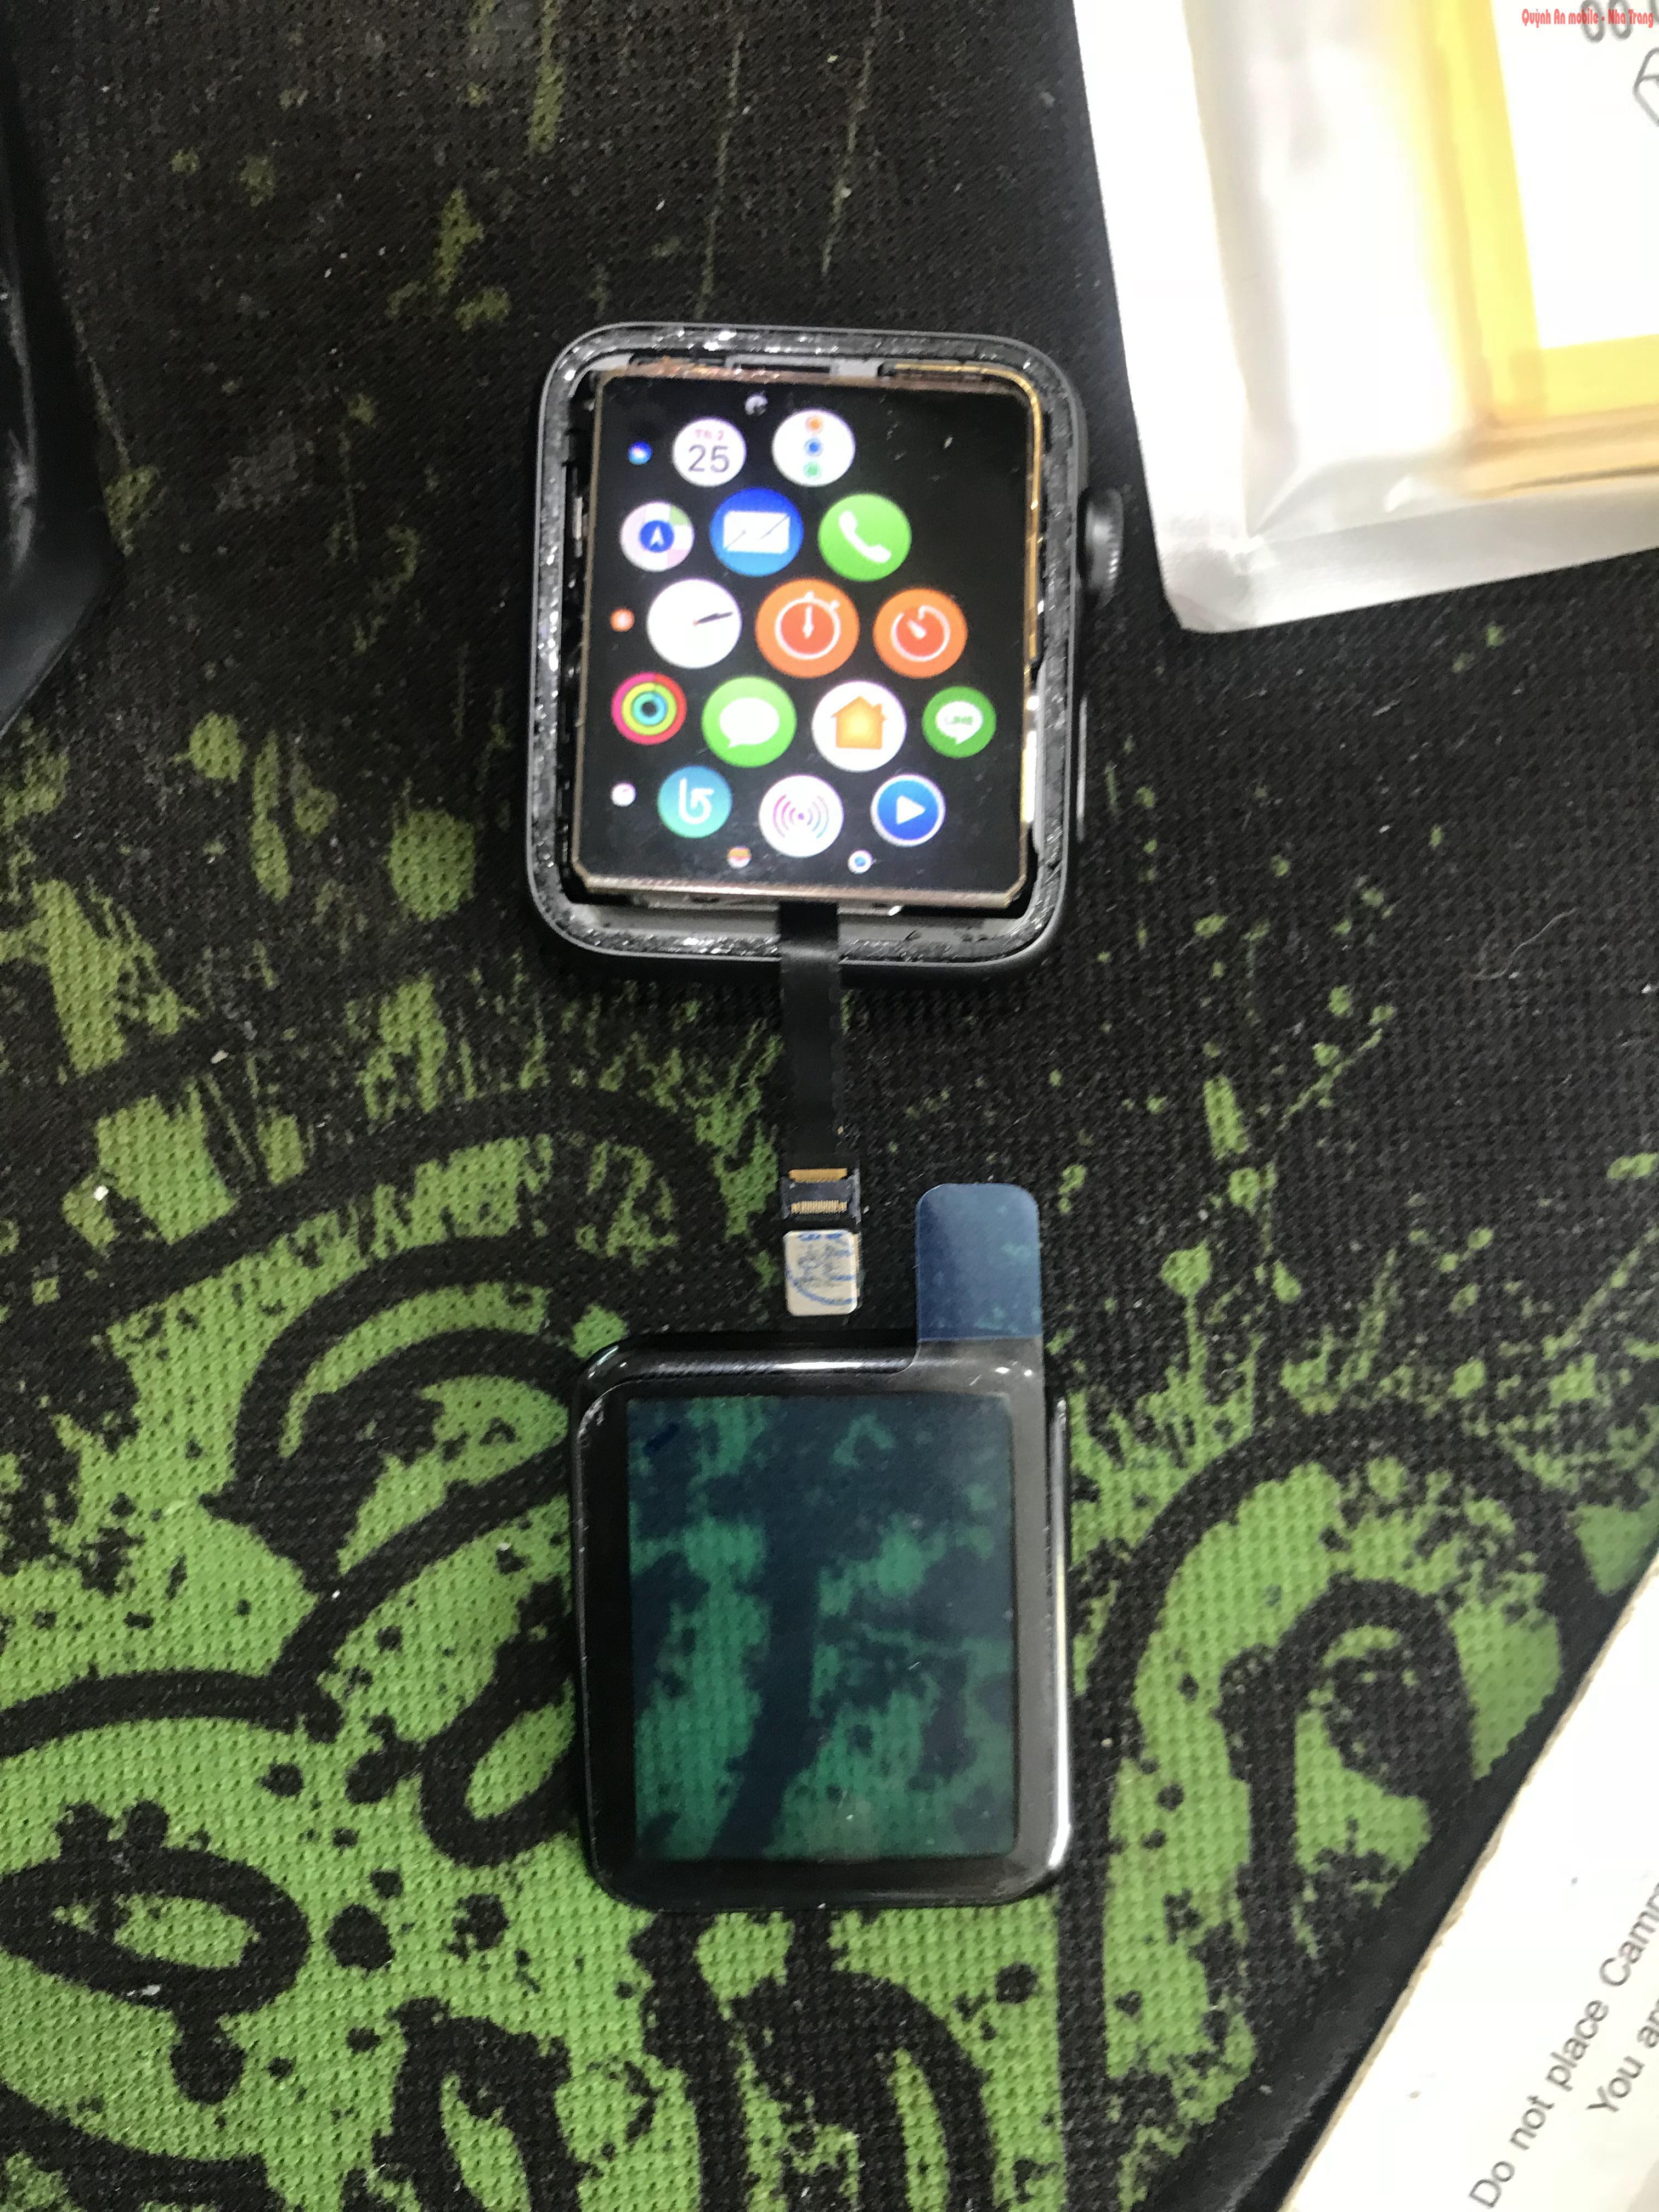 Replace and replace apple watch seri 2/3 screen in Nha Trang call 0907623999 Thay mặt kính cảm ứng apple watch seri 2/3 tại Nha Trang liên hệ 0907623999 Quỳnh An Mobile